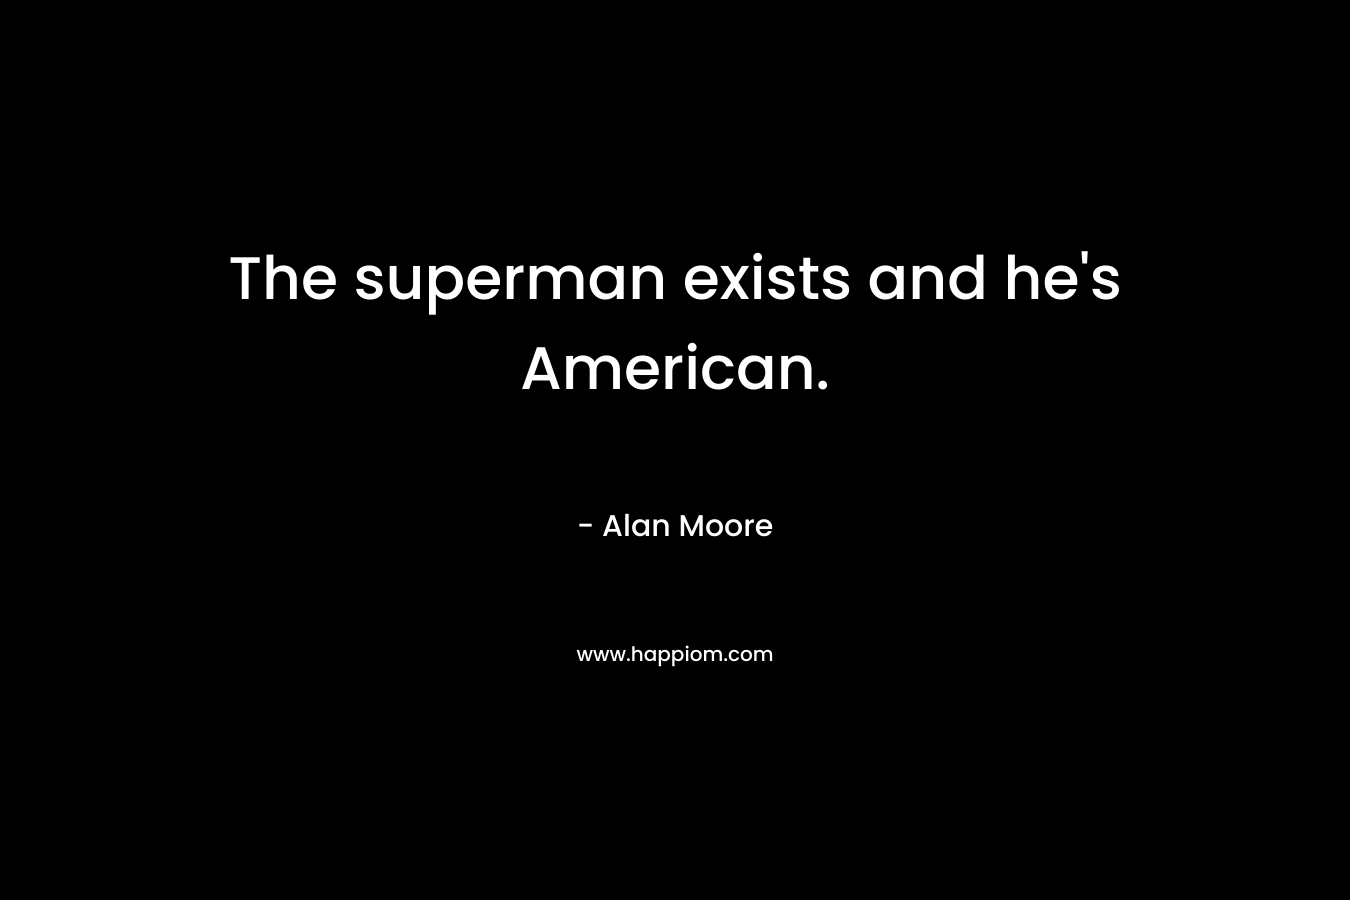 The superman exists and he's American.